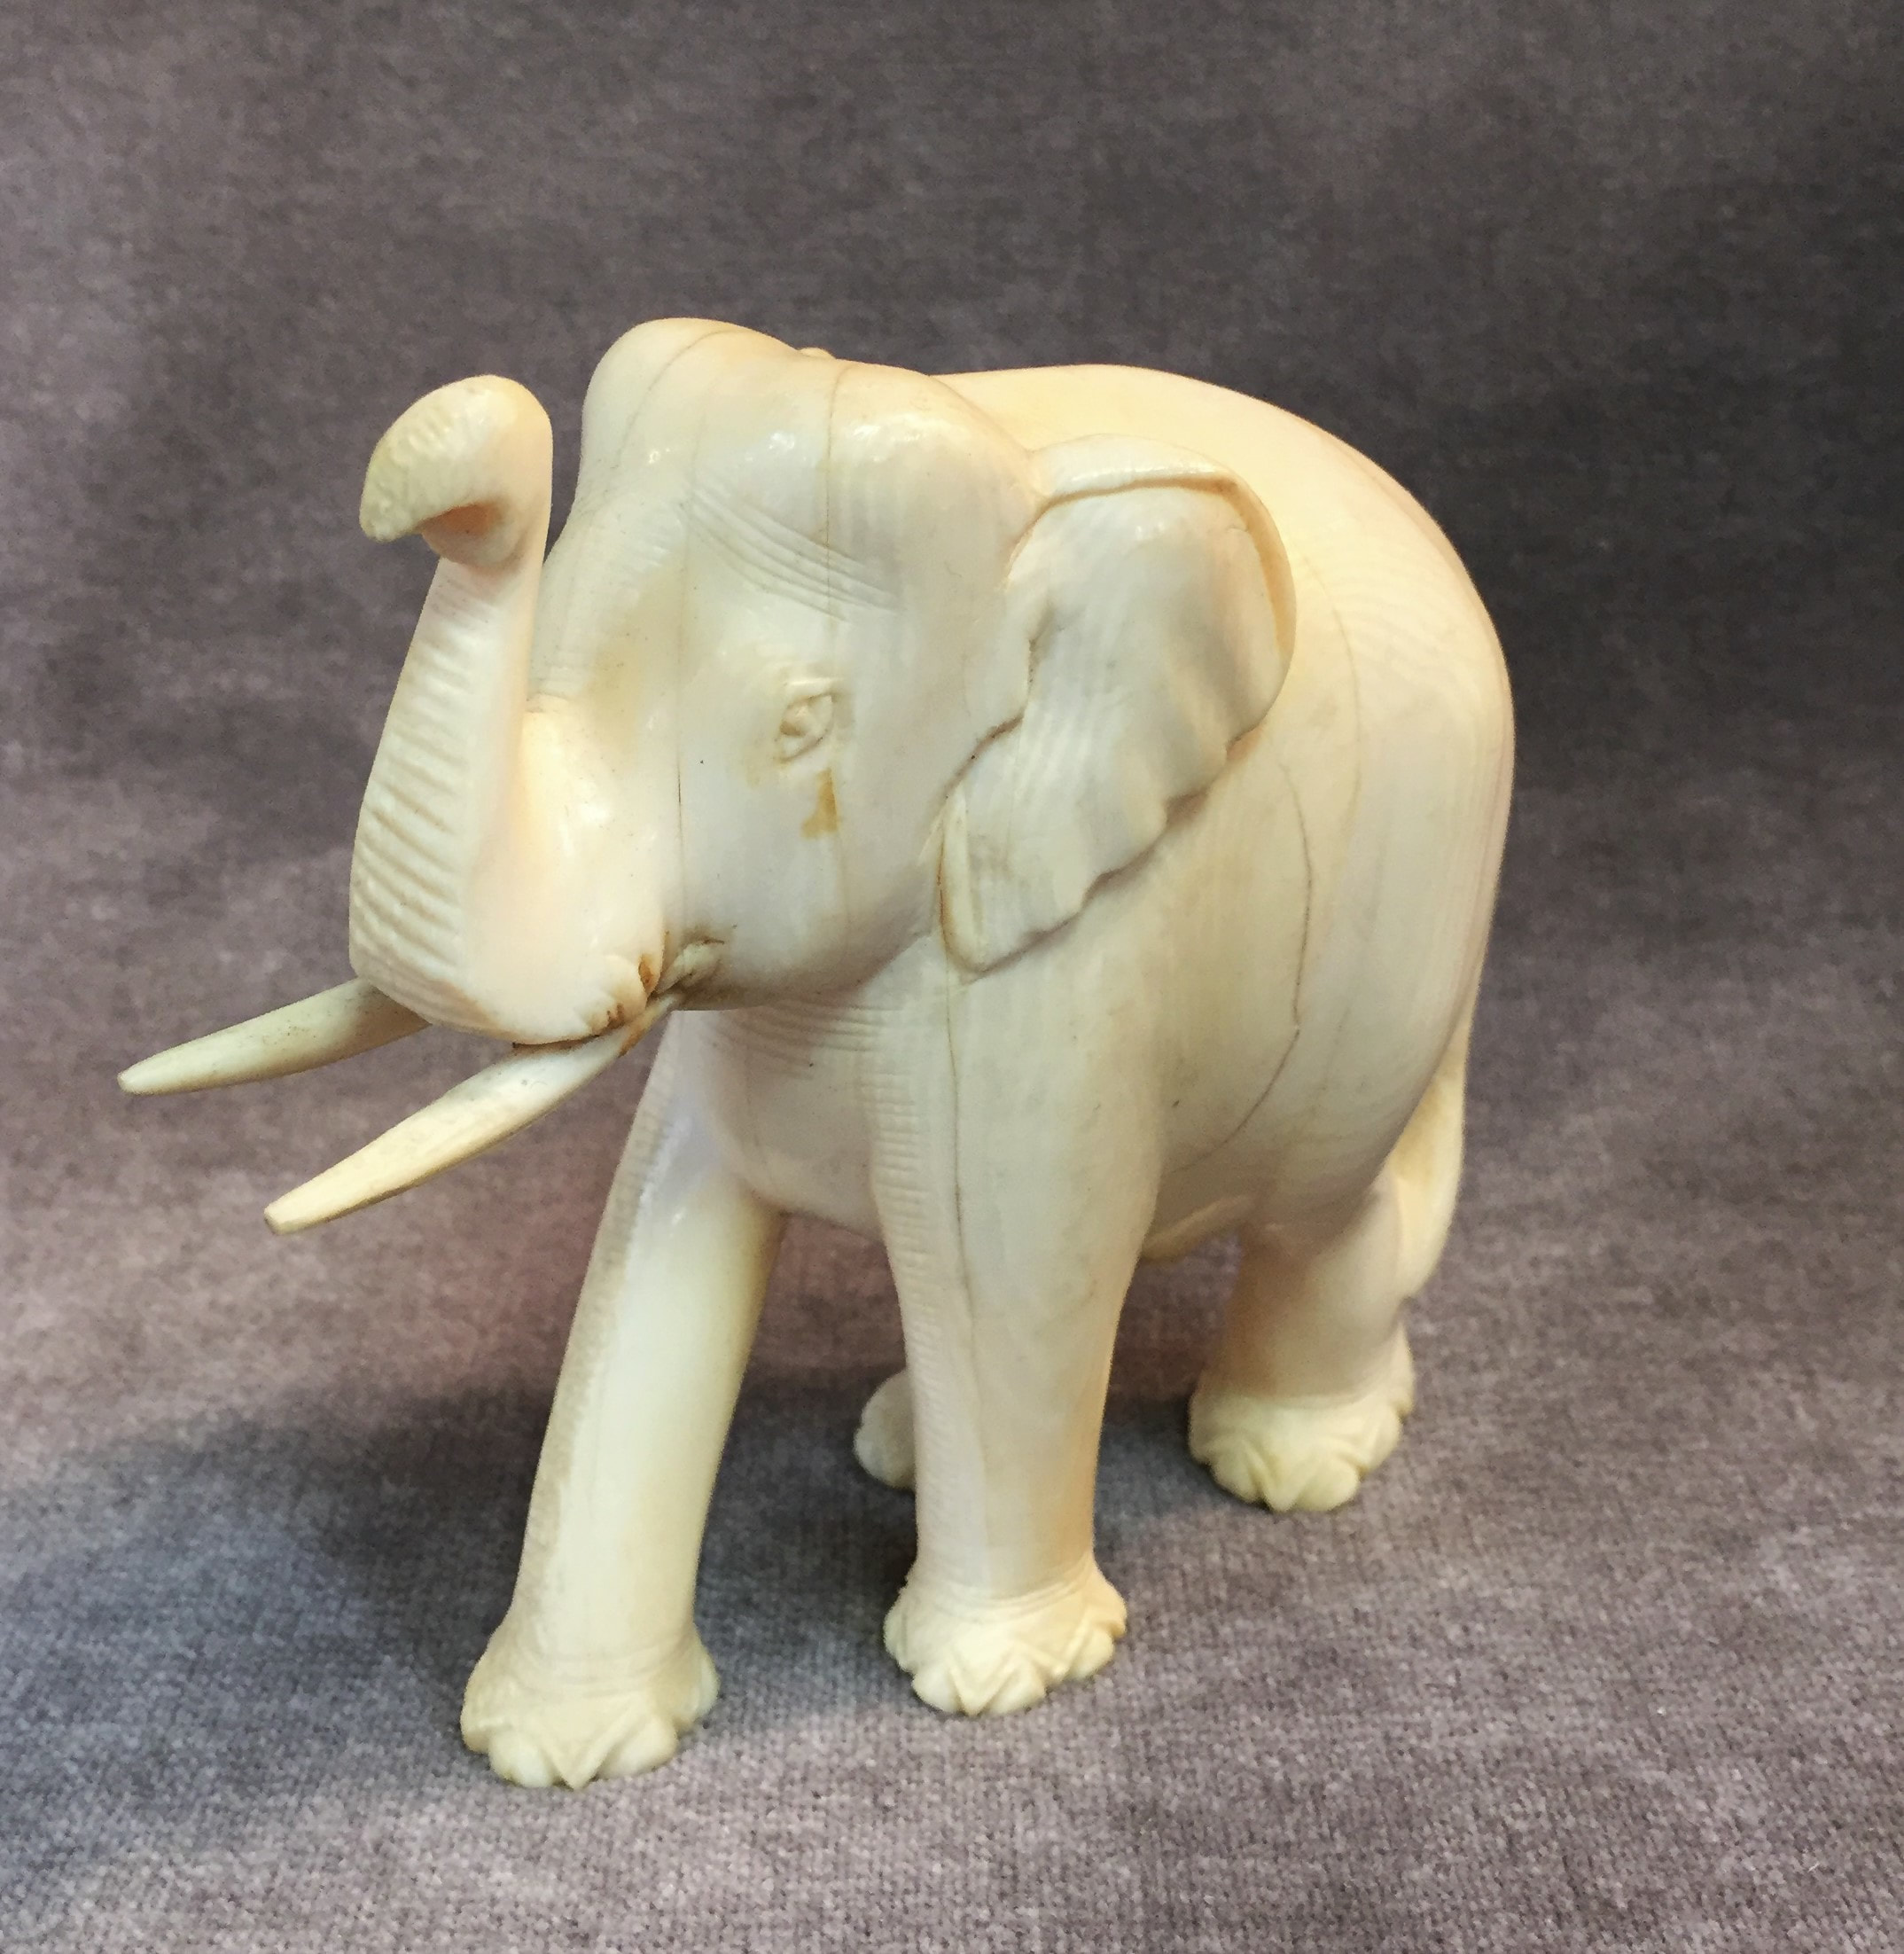 Antique Ivory Elephant Figurines All Categories Antiques Art